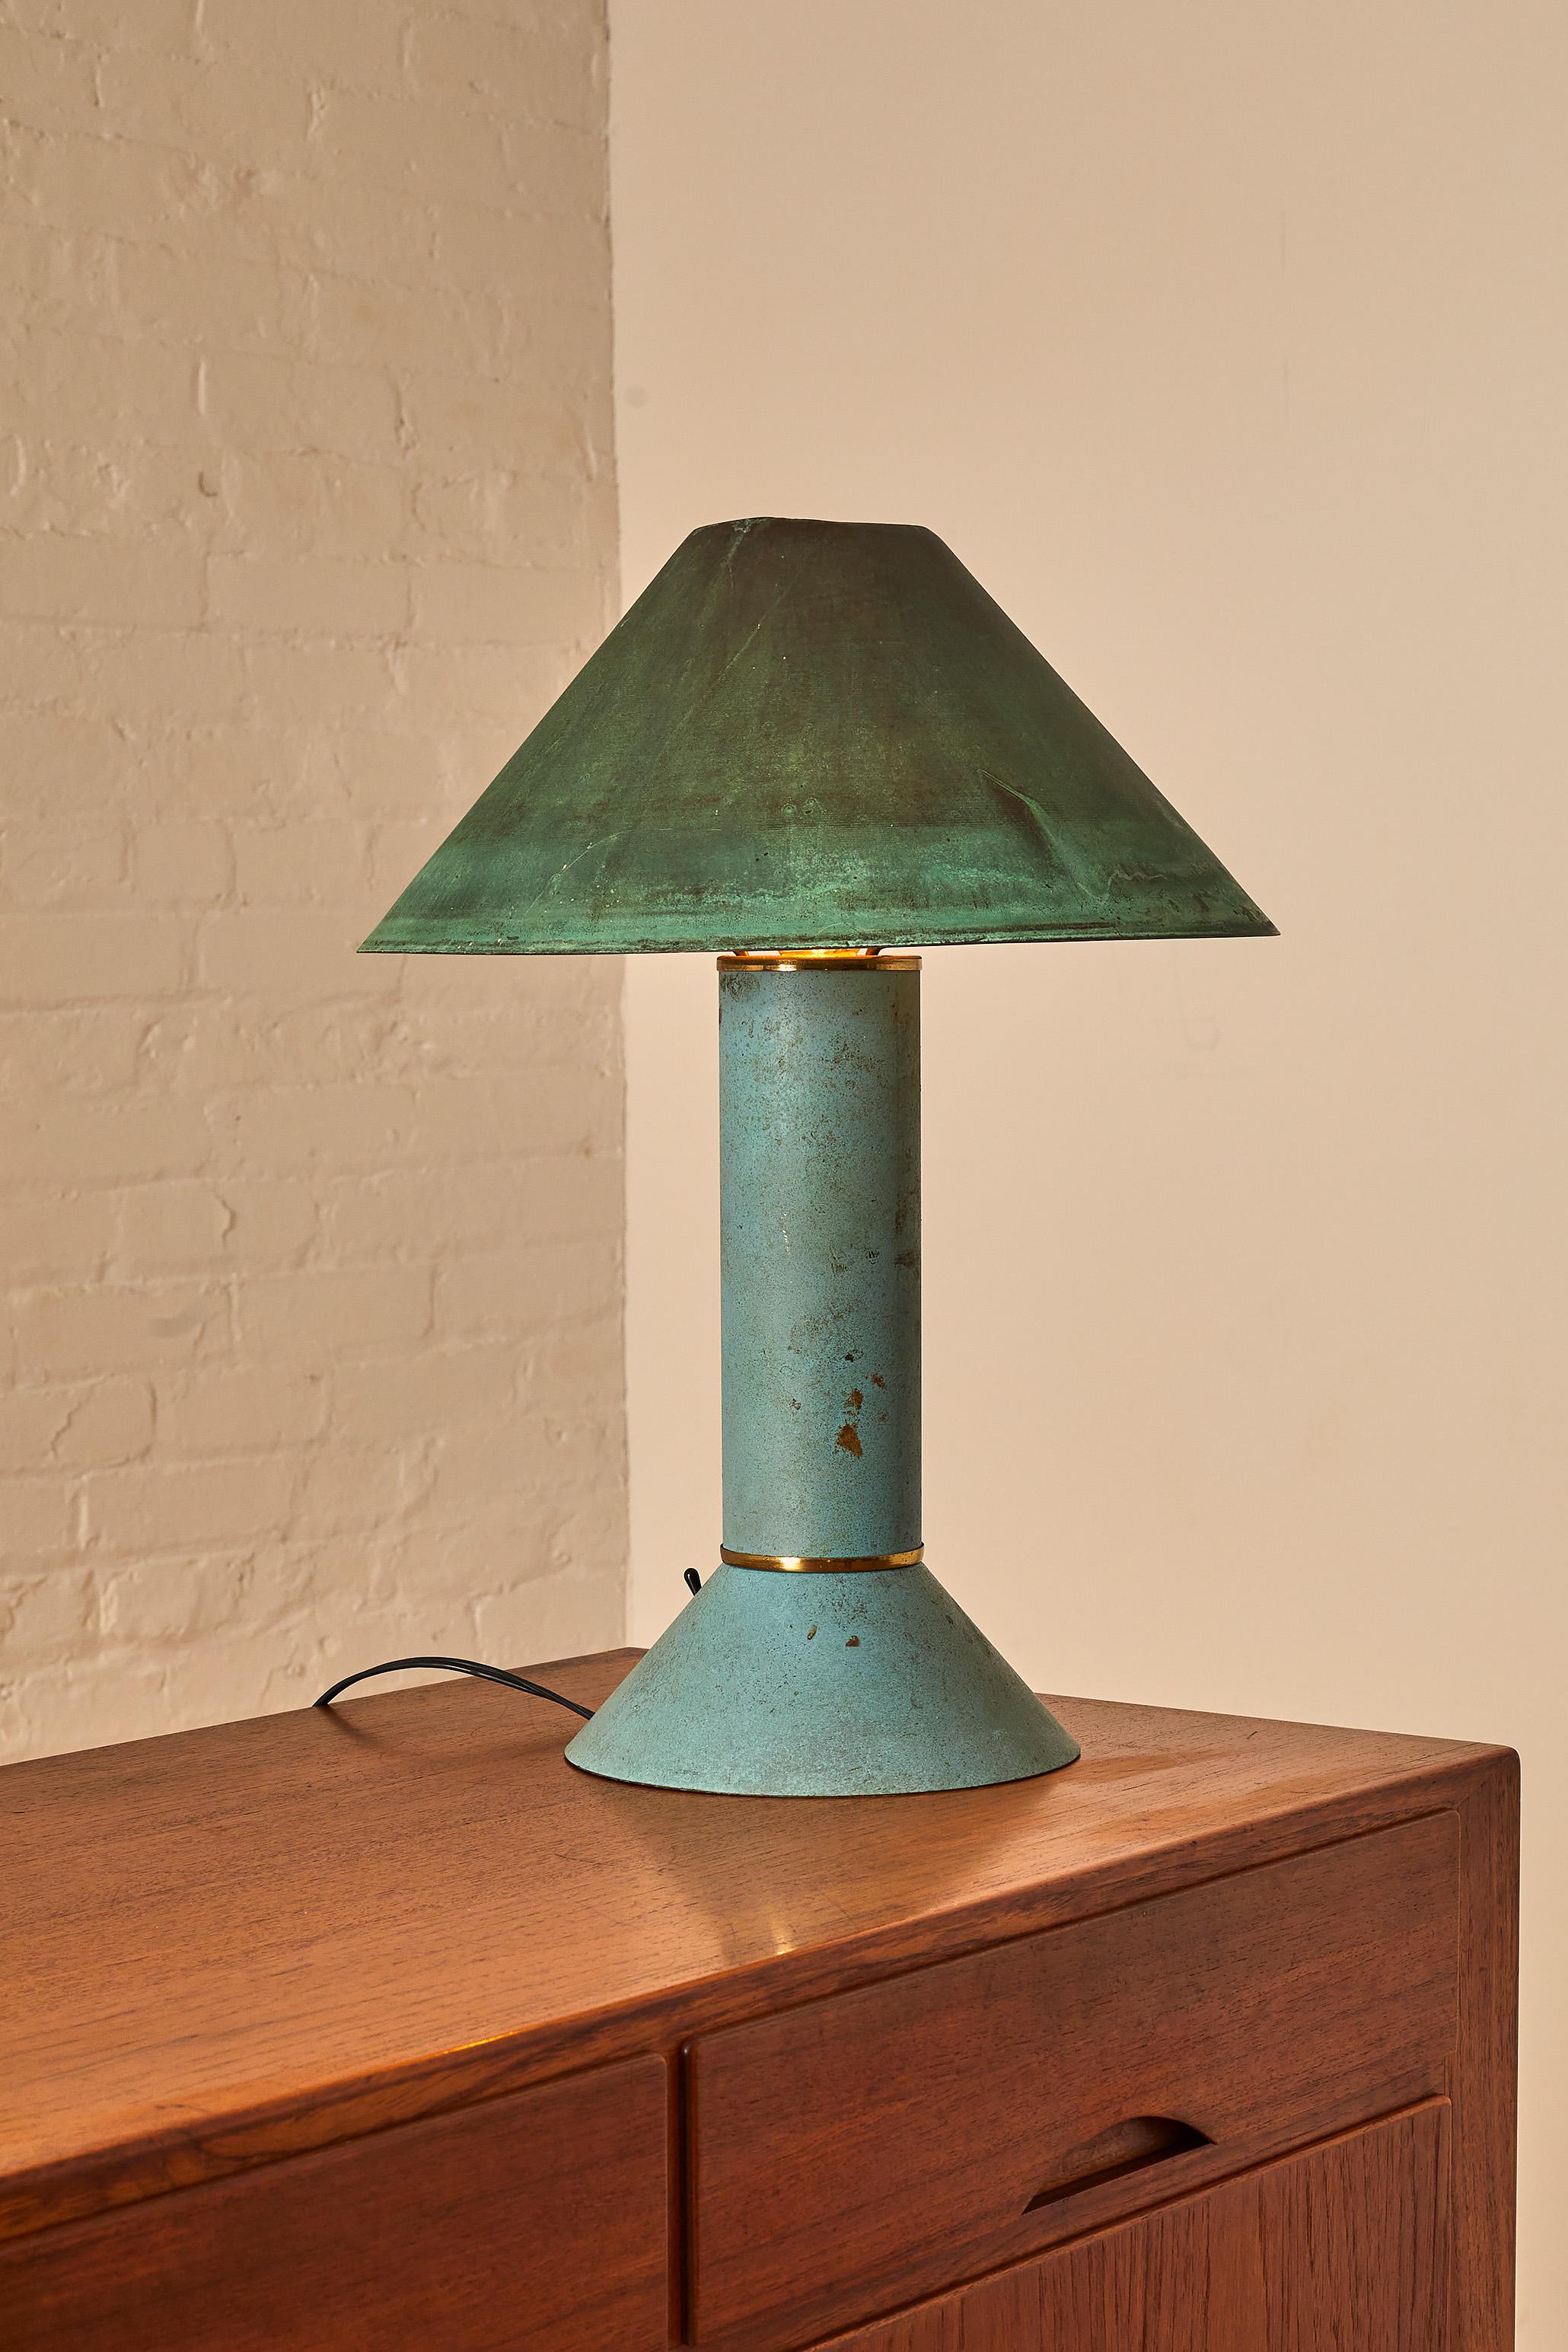 Postmodern Ron Rezek California copper table lamp. Classic form and motif of the era in patina copper. White enamel reflector shade attaches to base, outer copper shade rests on top.